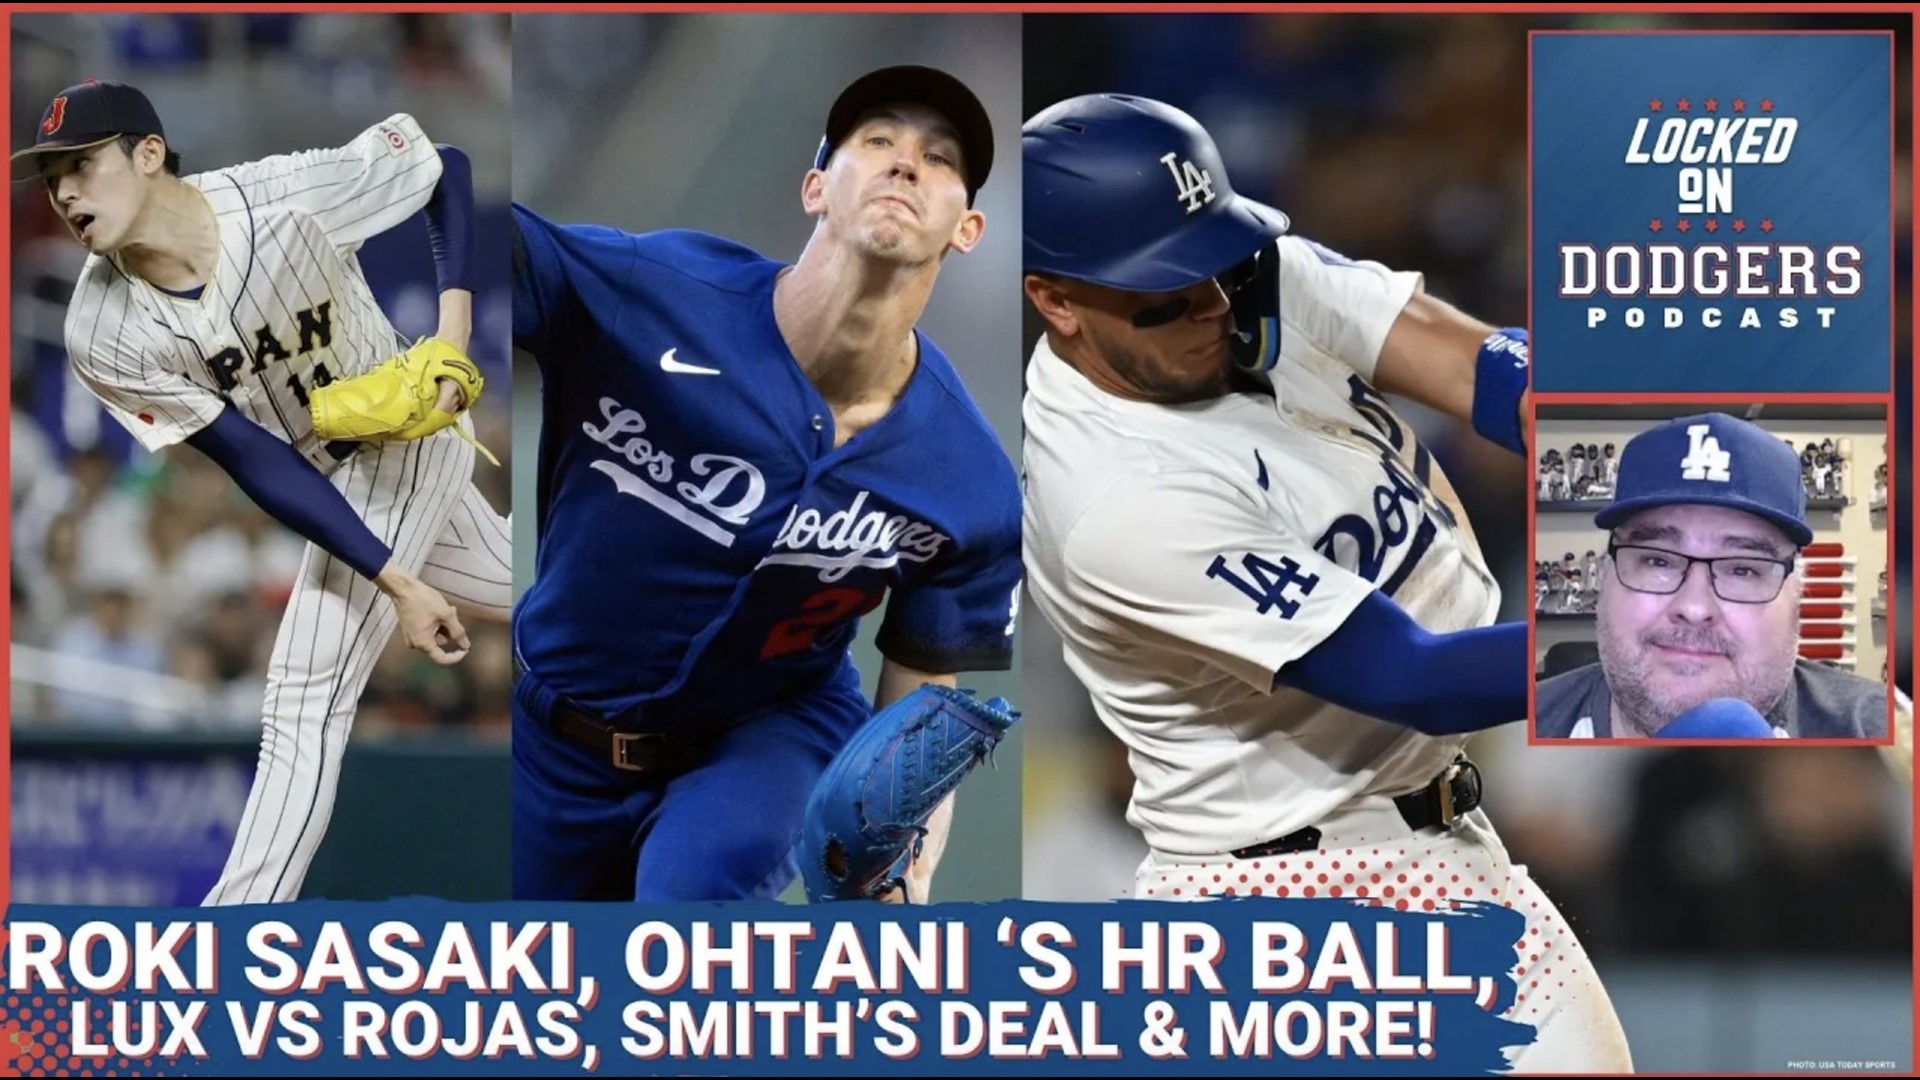 It's an off-day mailbag episode! Are the Los Angeles Dodgers a lock to get Japanese phenom Roki Sasaki?